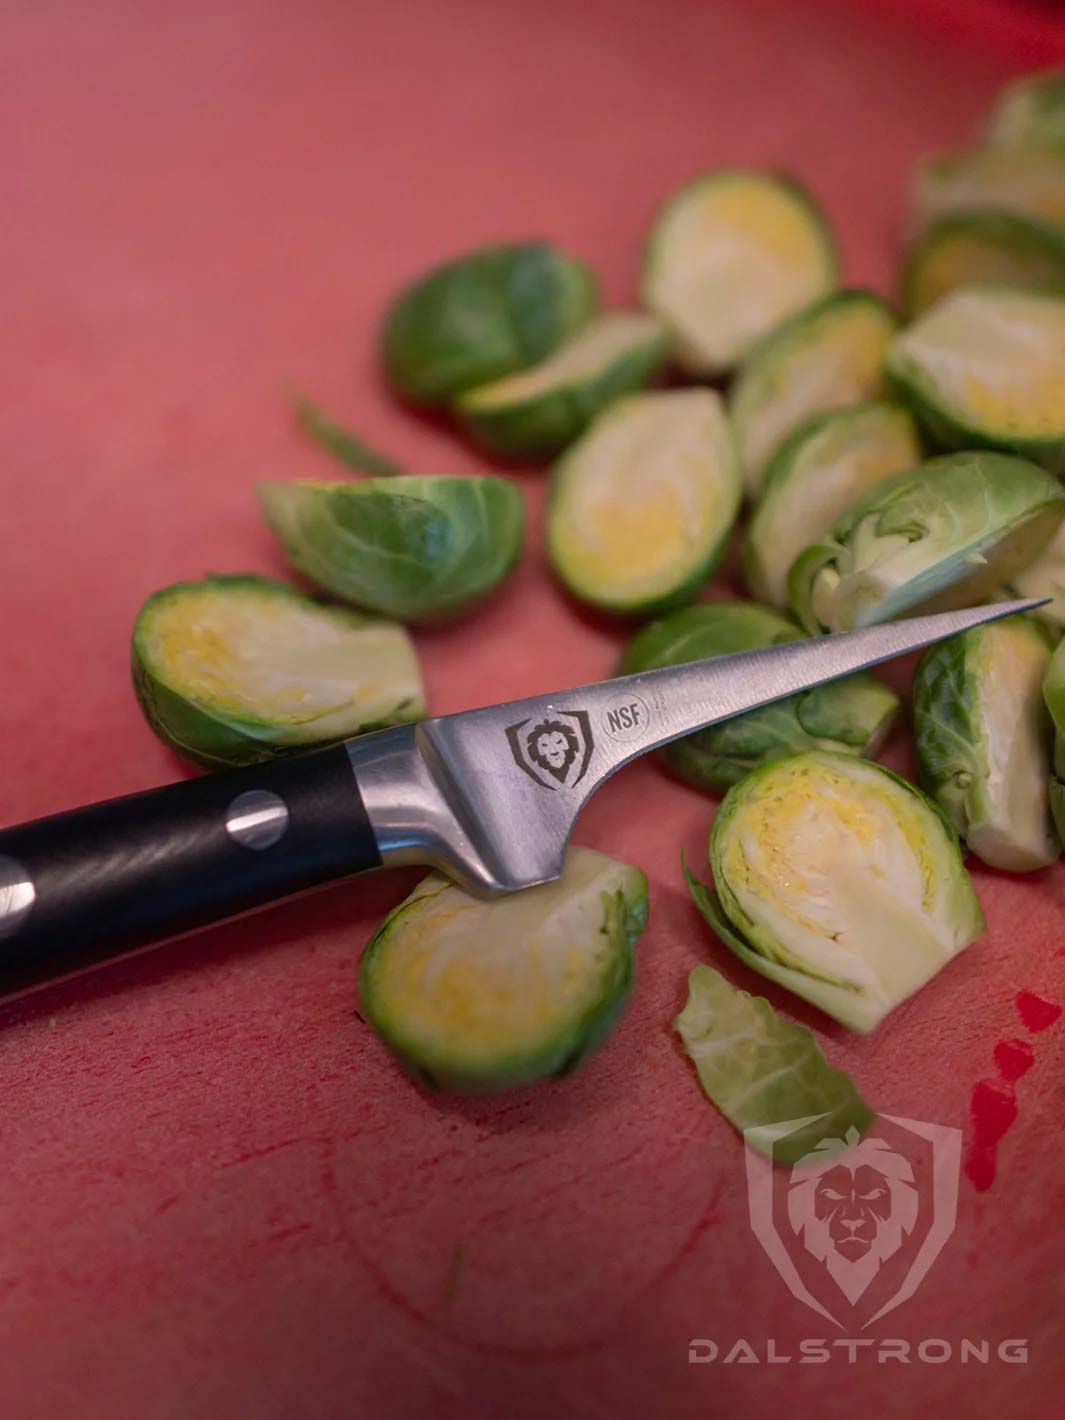 Dalstrong gladiator series 3 piece paring knife with black handles and slices of brussel sprouts.